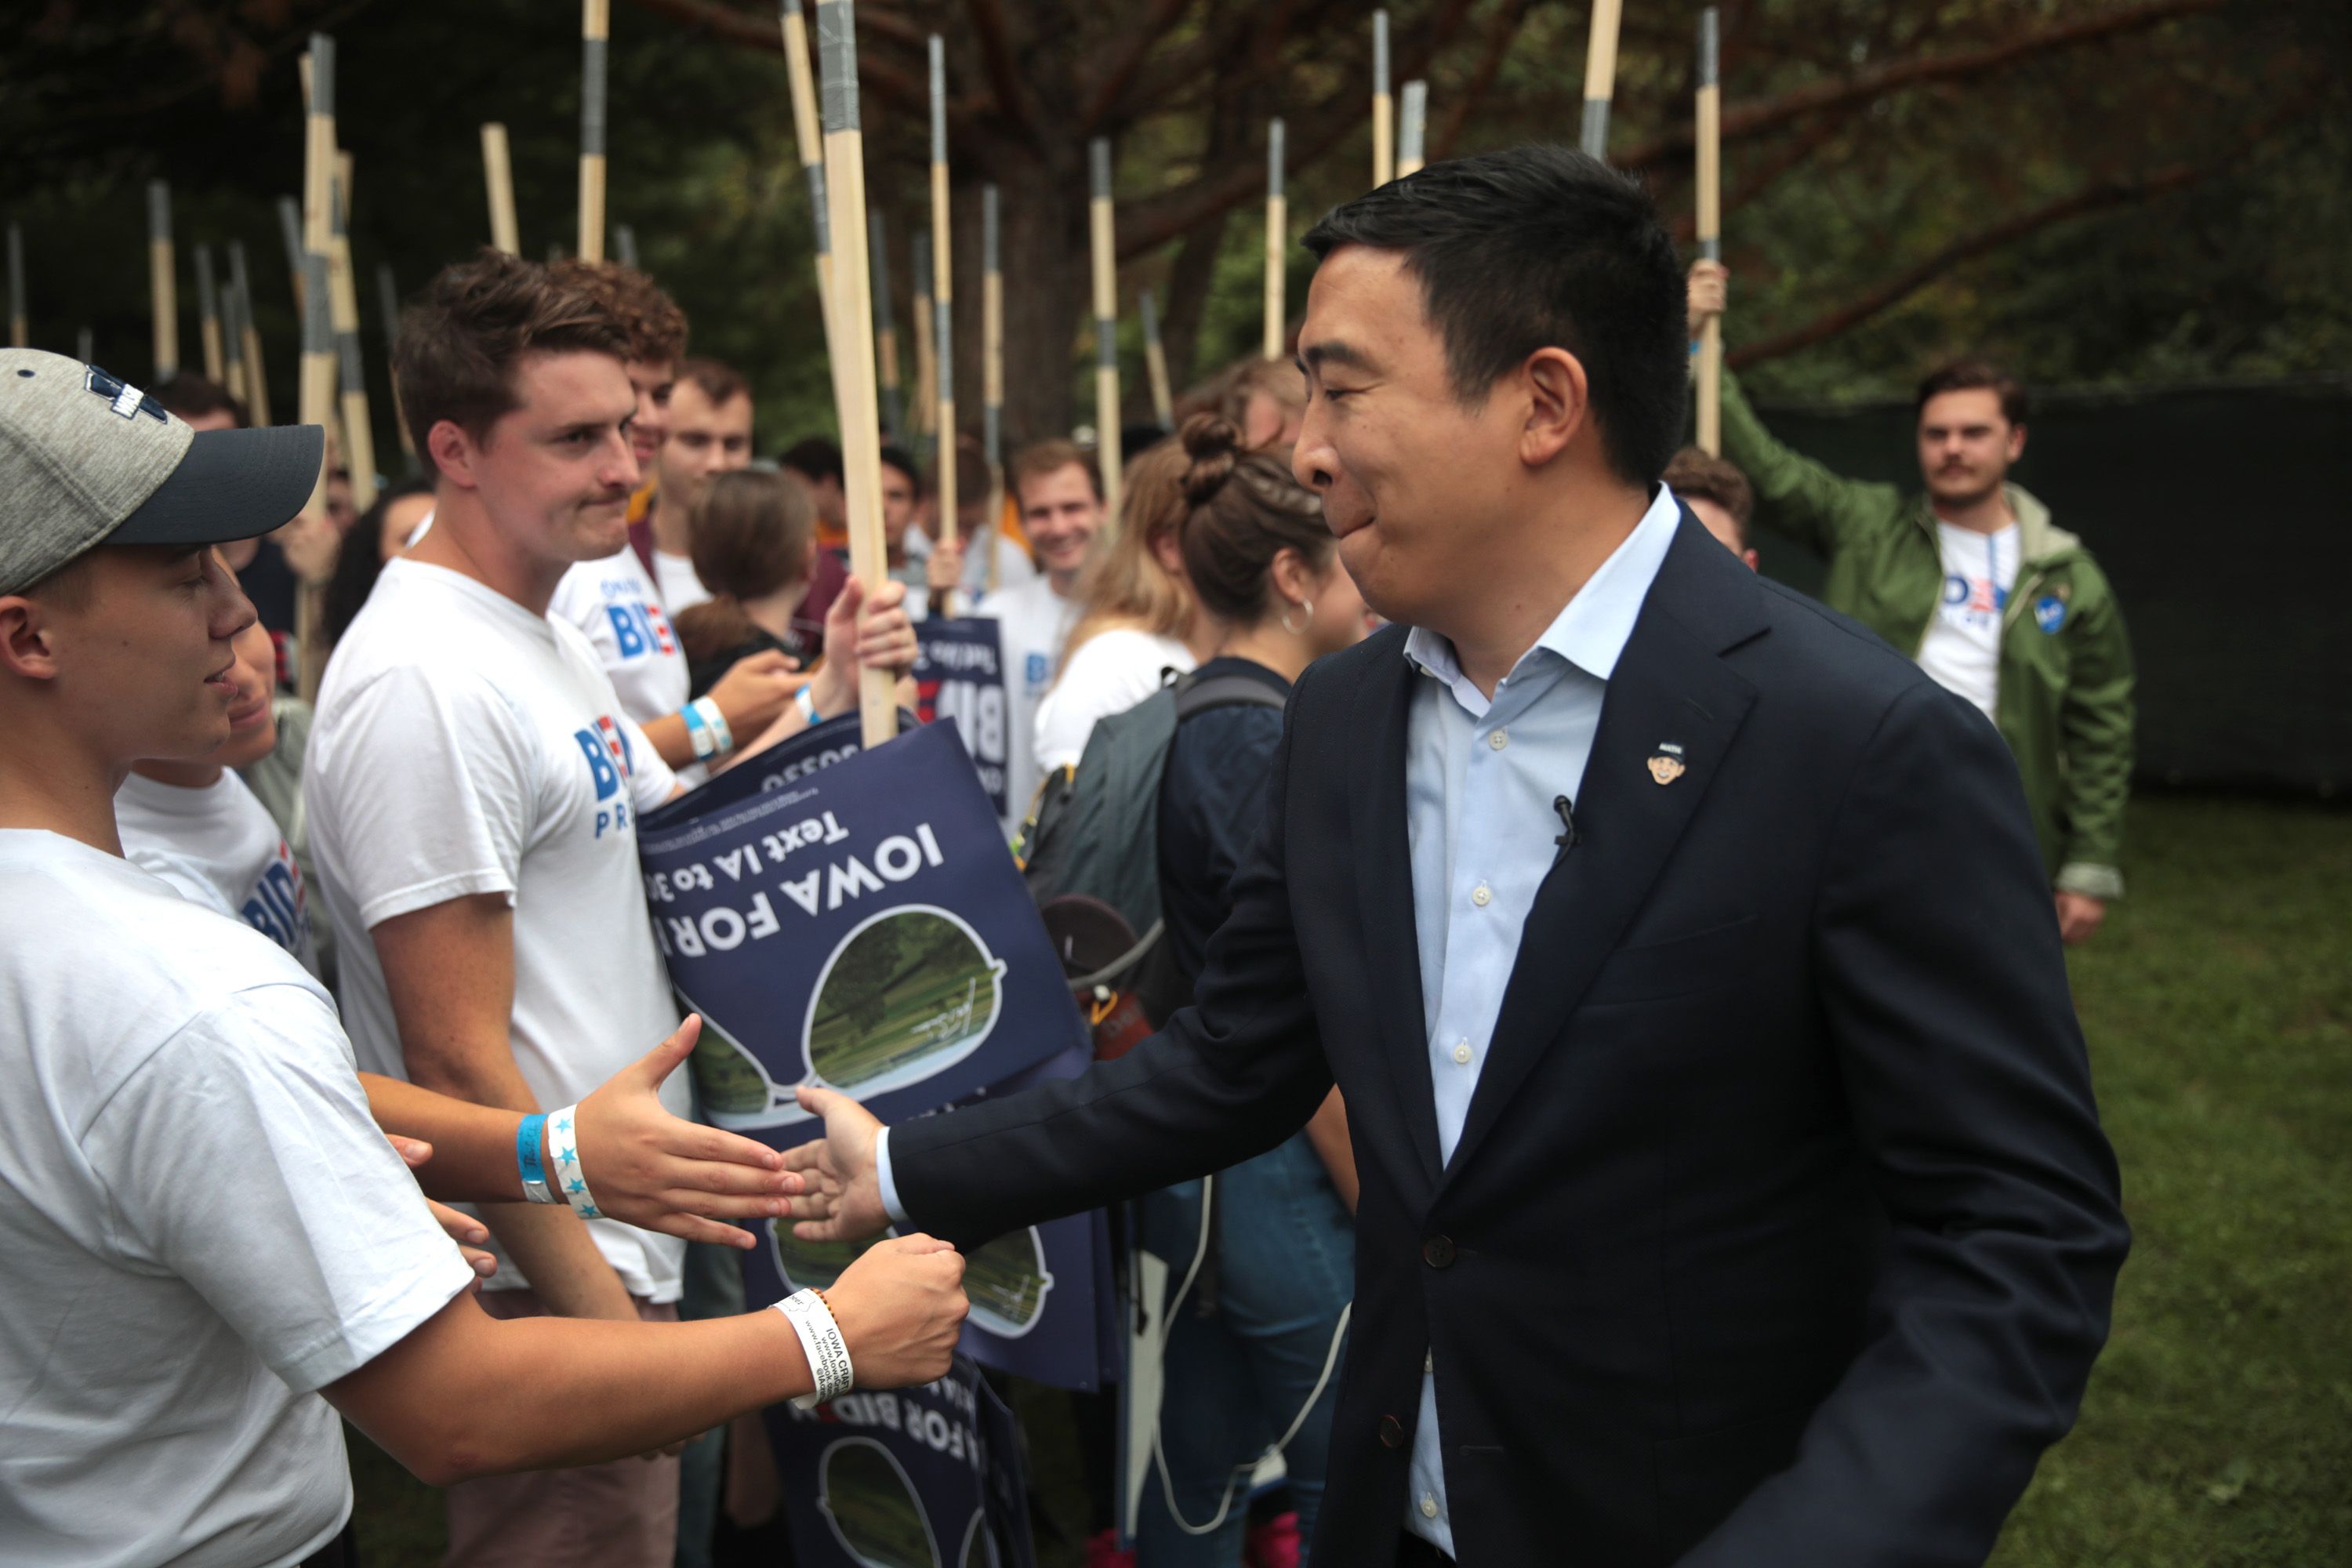 Democratic presidential candidate, entrepreneur Andrew Yang greets guests at the Polk County Democrats' Steak Fry on September 21, 2019 in Des Moines, Iowa. 